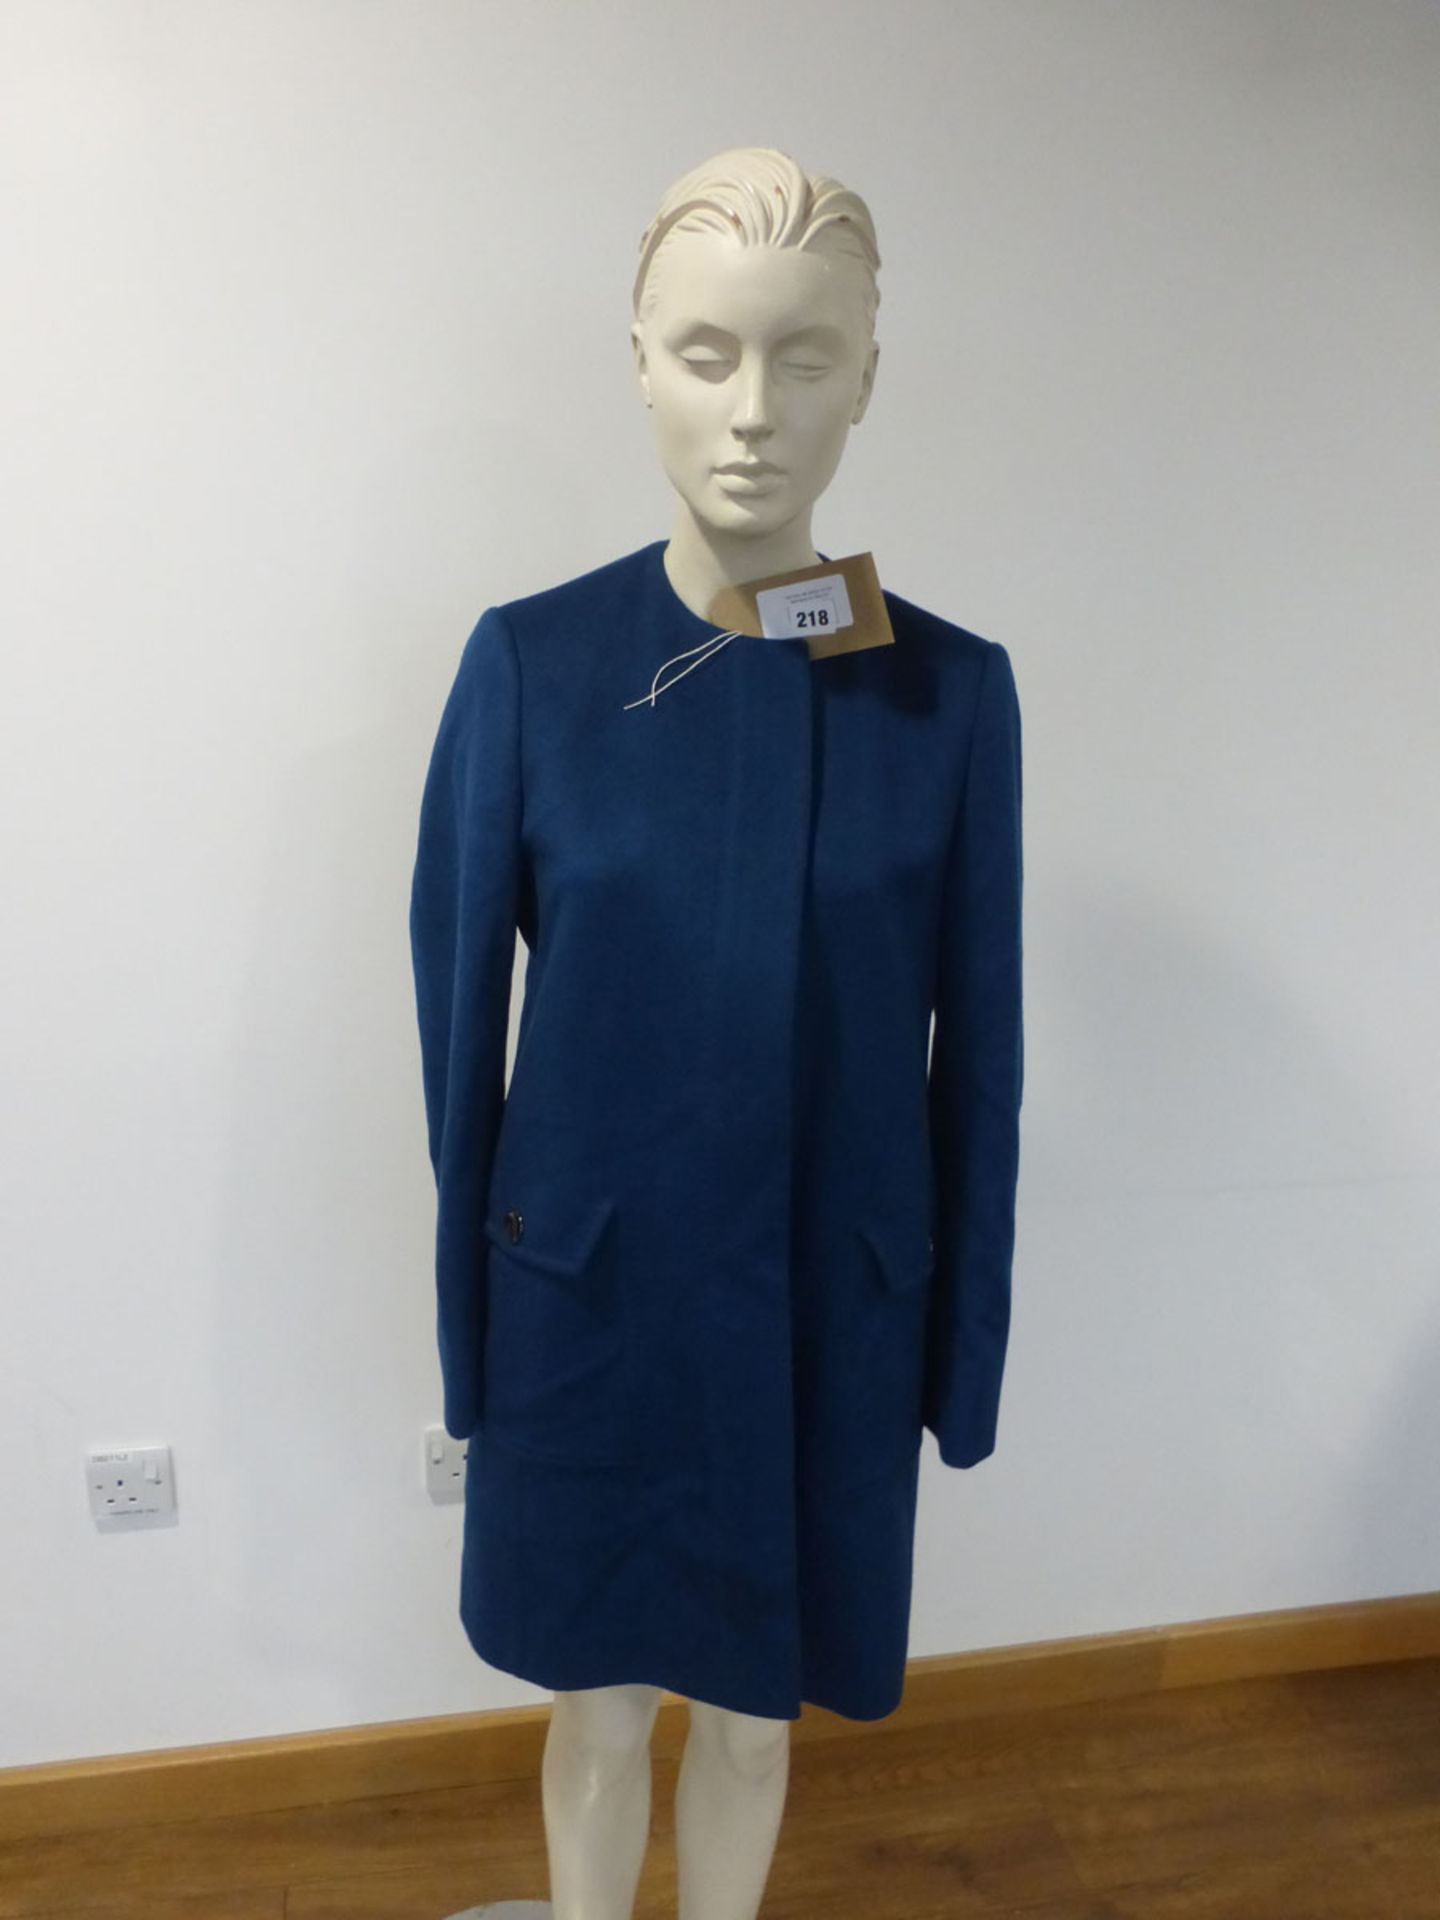 Jager wool long length jacket in blue size 8